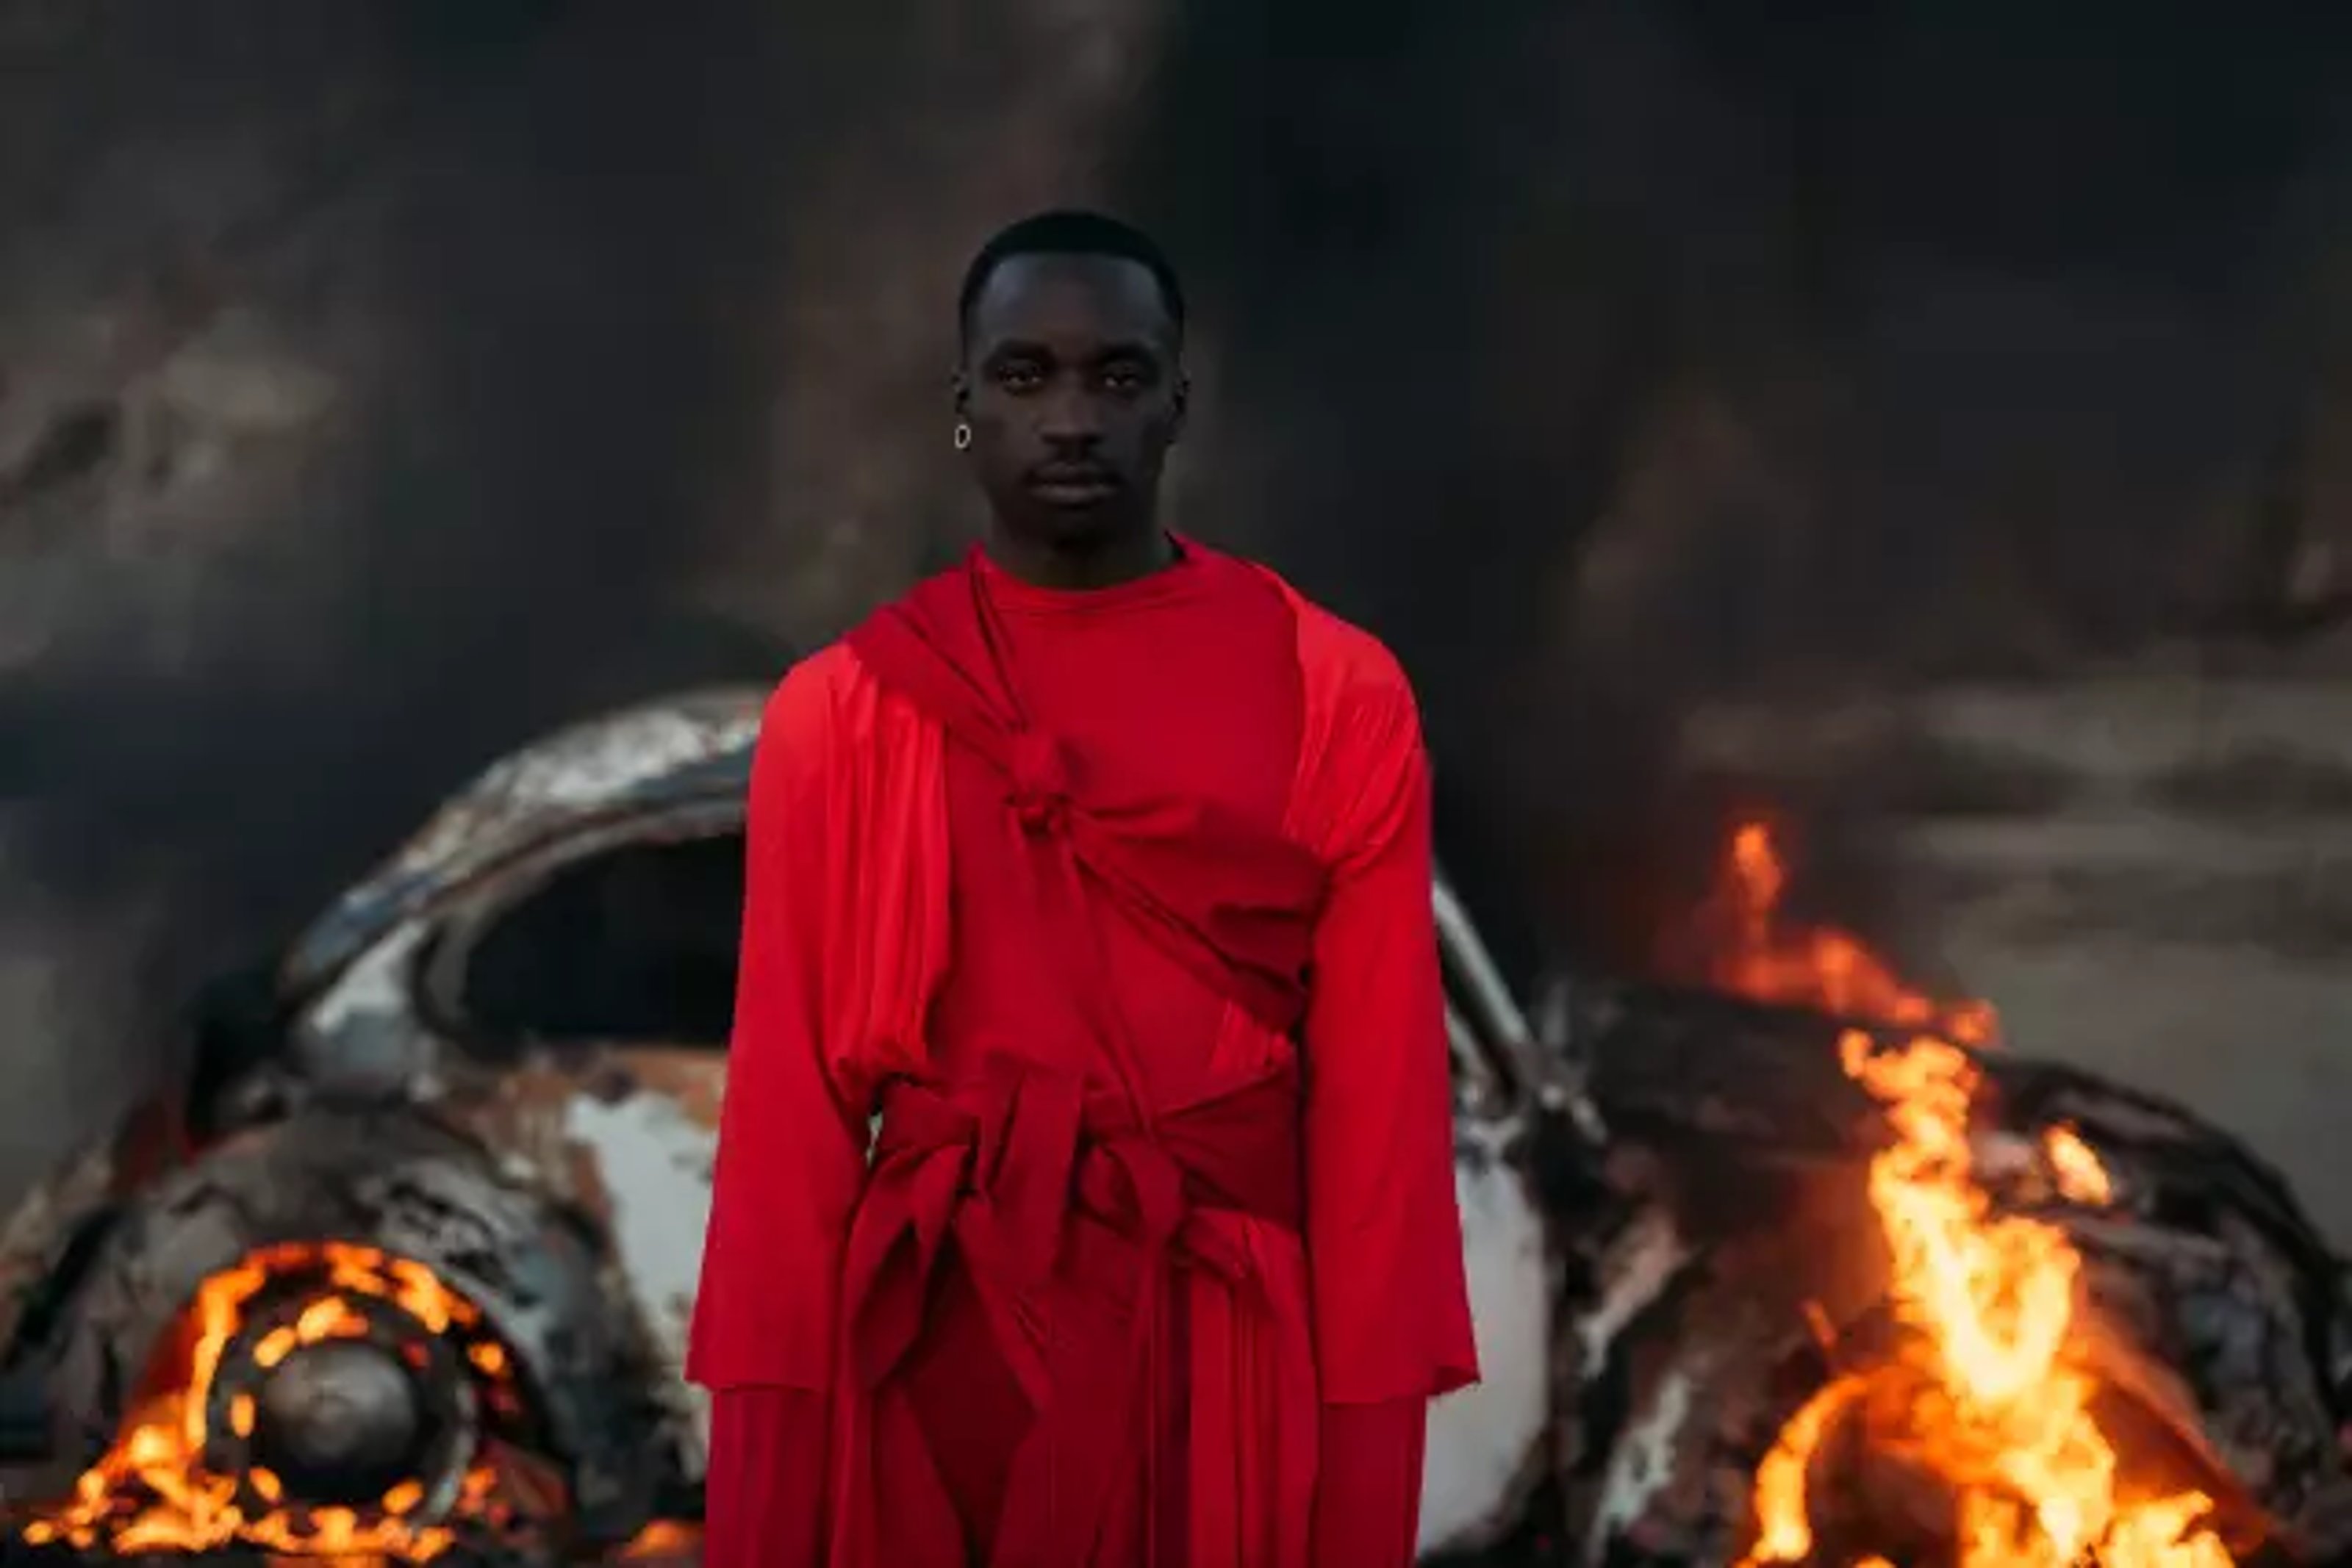 A man wrapped in loose red fabric standing in front of a burning white car.